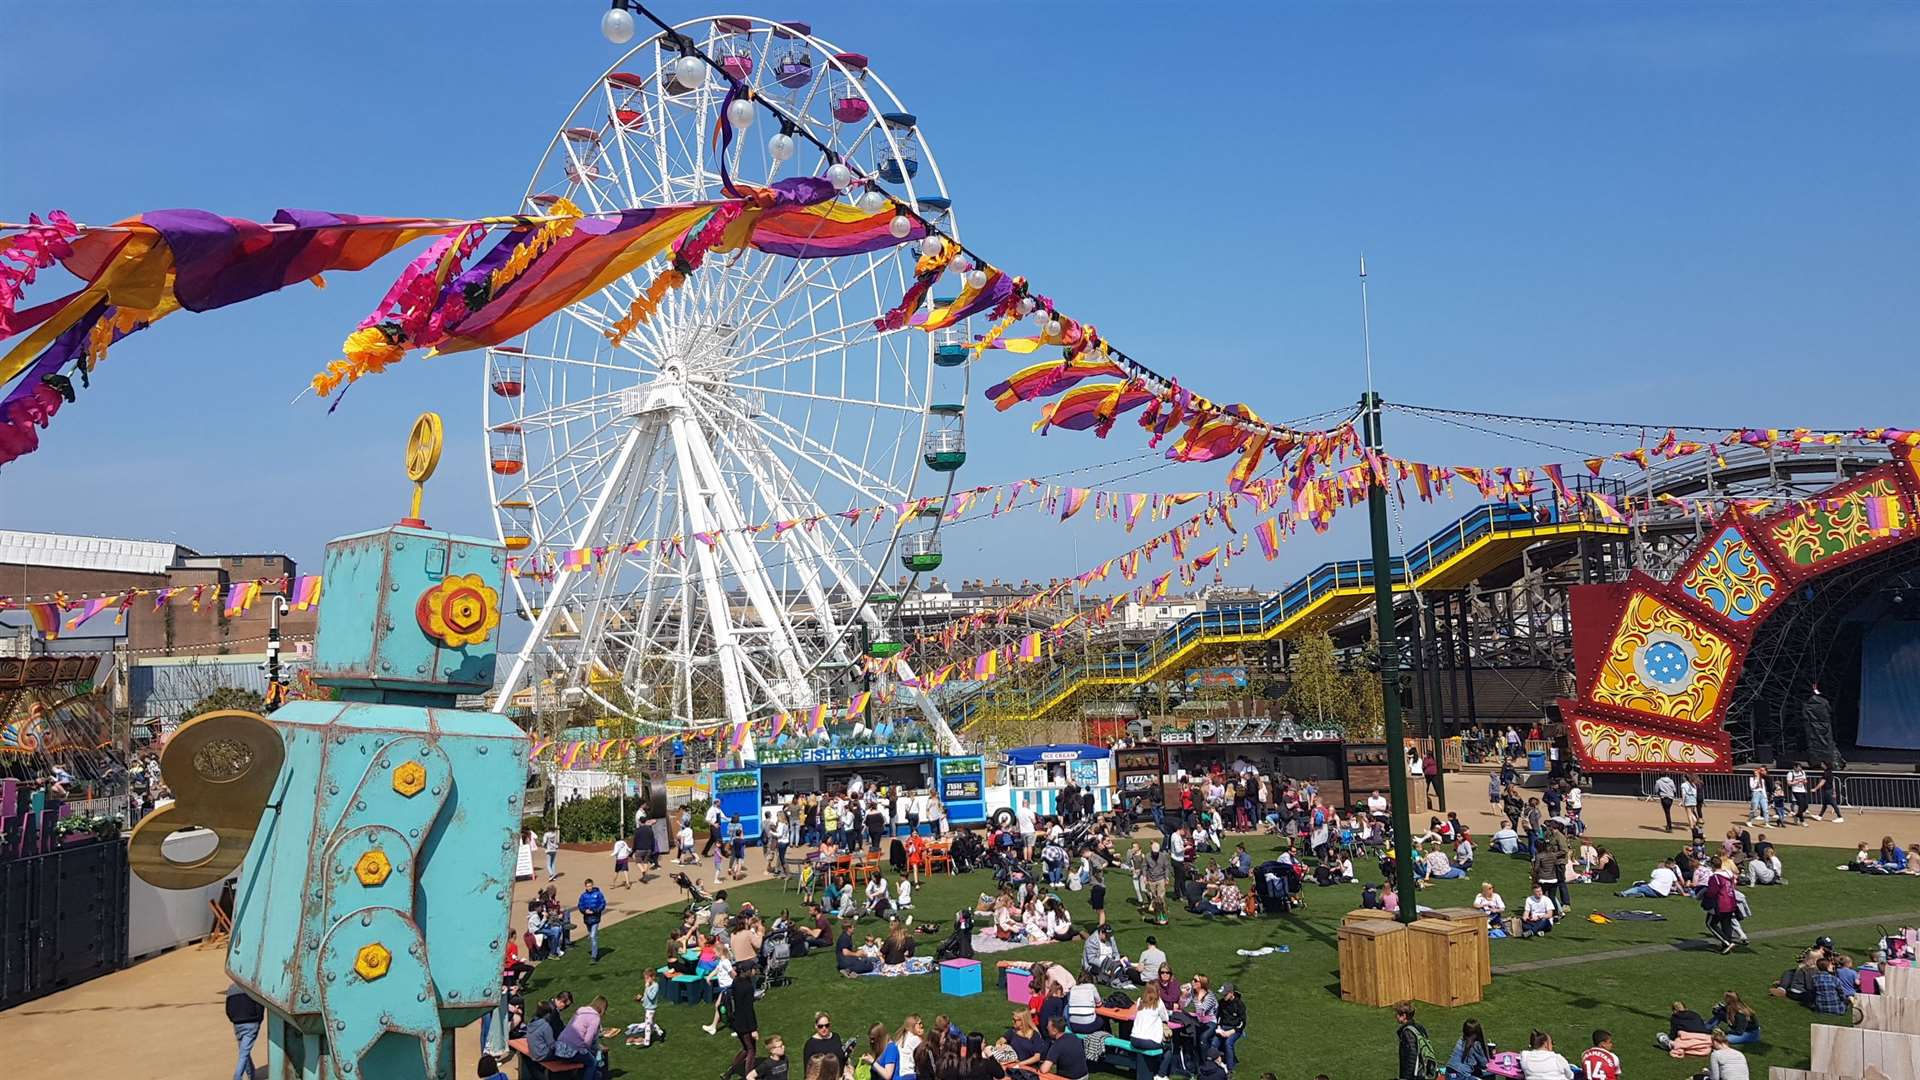 The park celebrated its best opening weekend in April this year